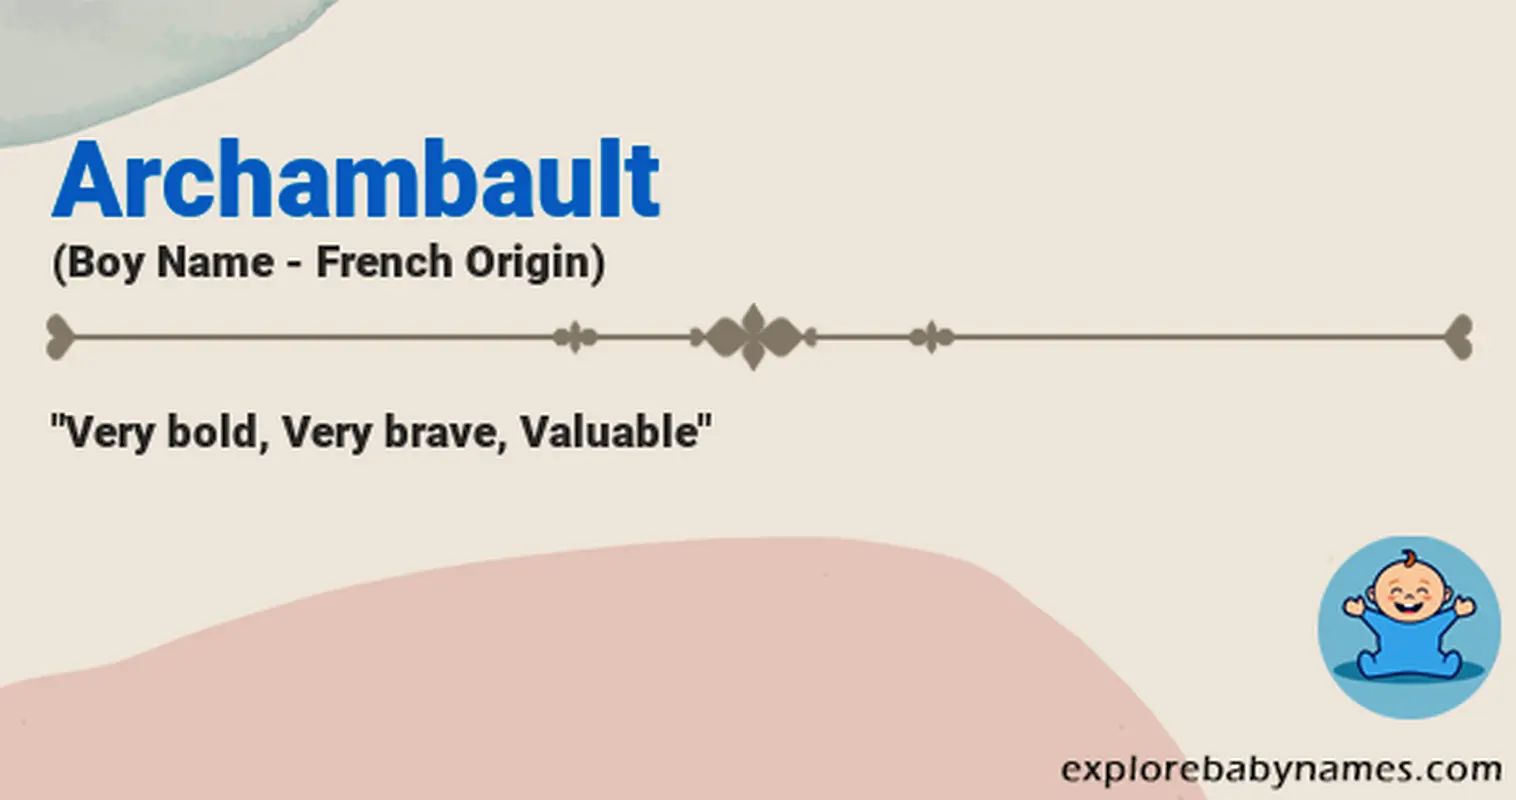 Meaning of Archambault